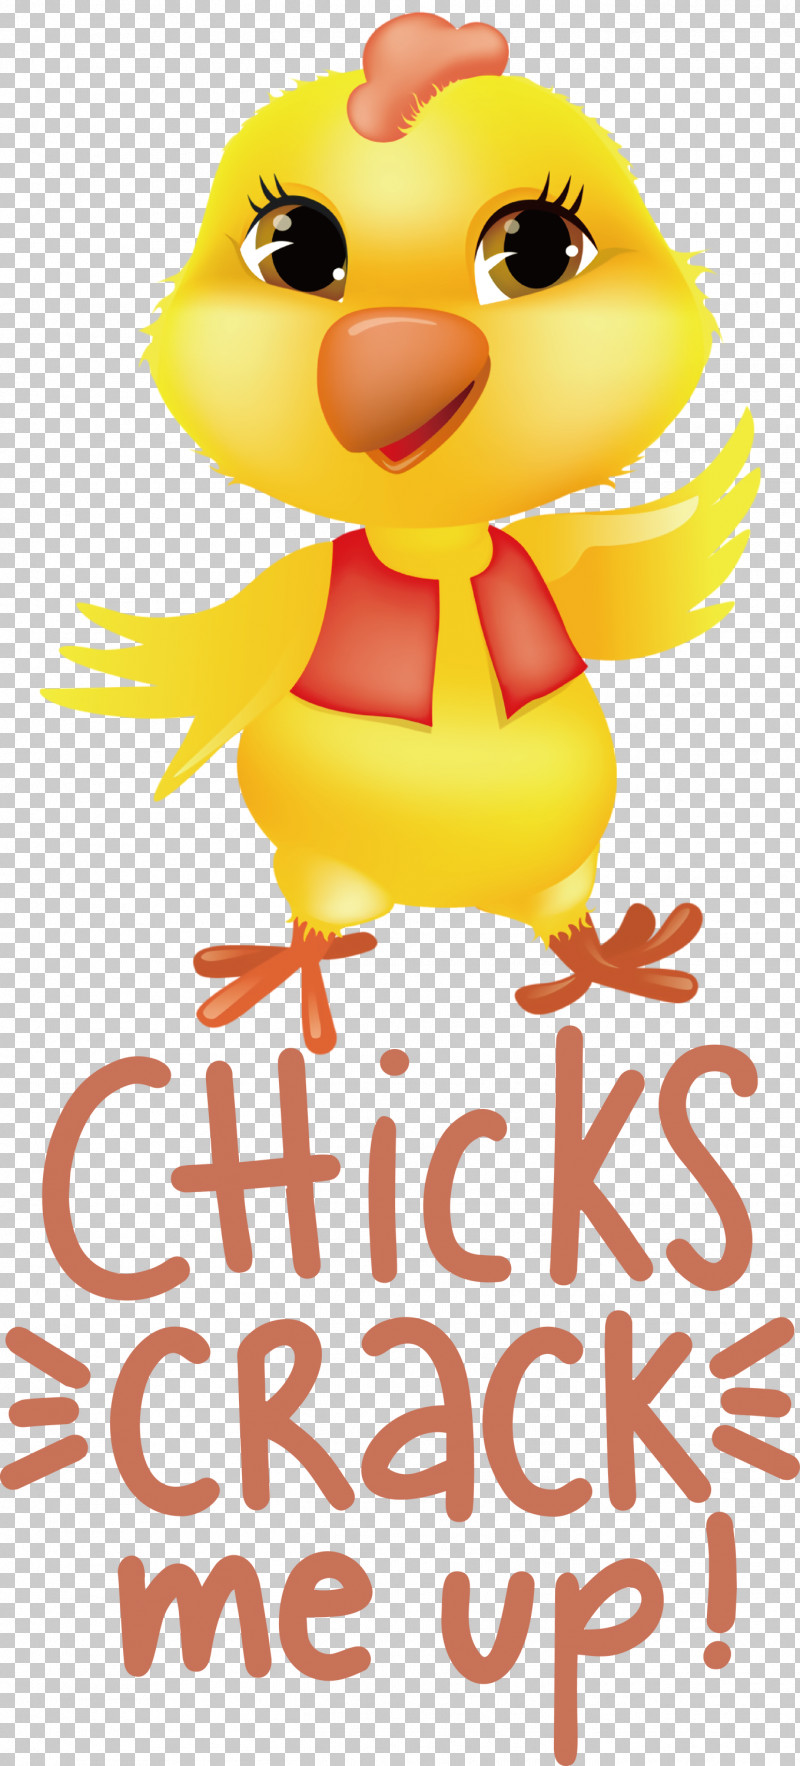 Chicks Crack Me Up Easter Day Happy Easter PNG, Clipart, Beak, Birds, Cartoon, Ducks, Easter Day Free PNG Download